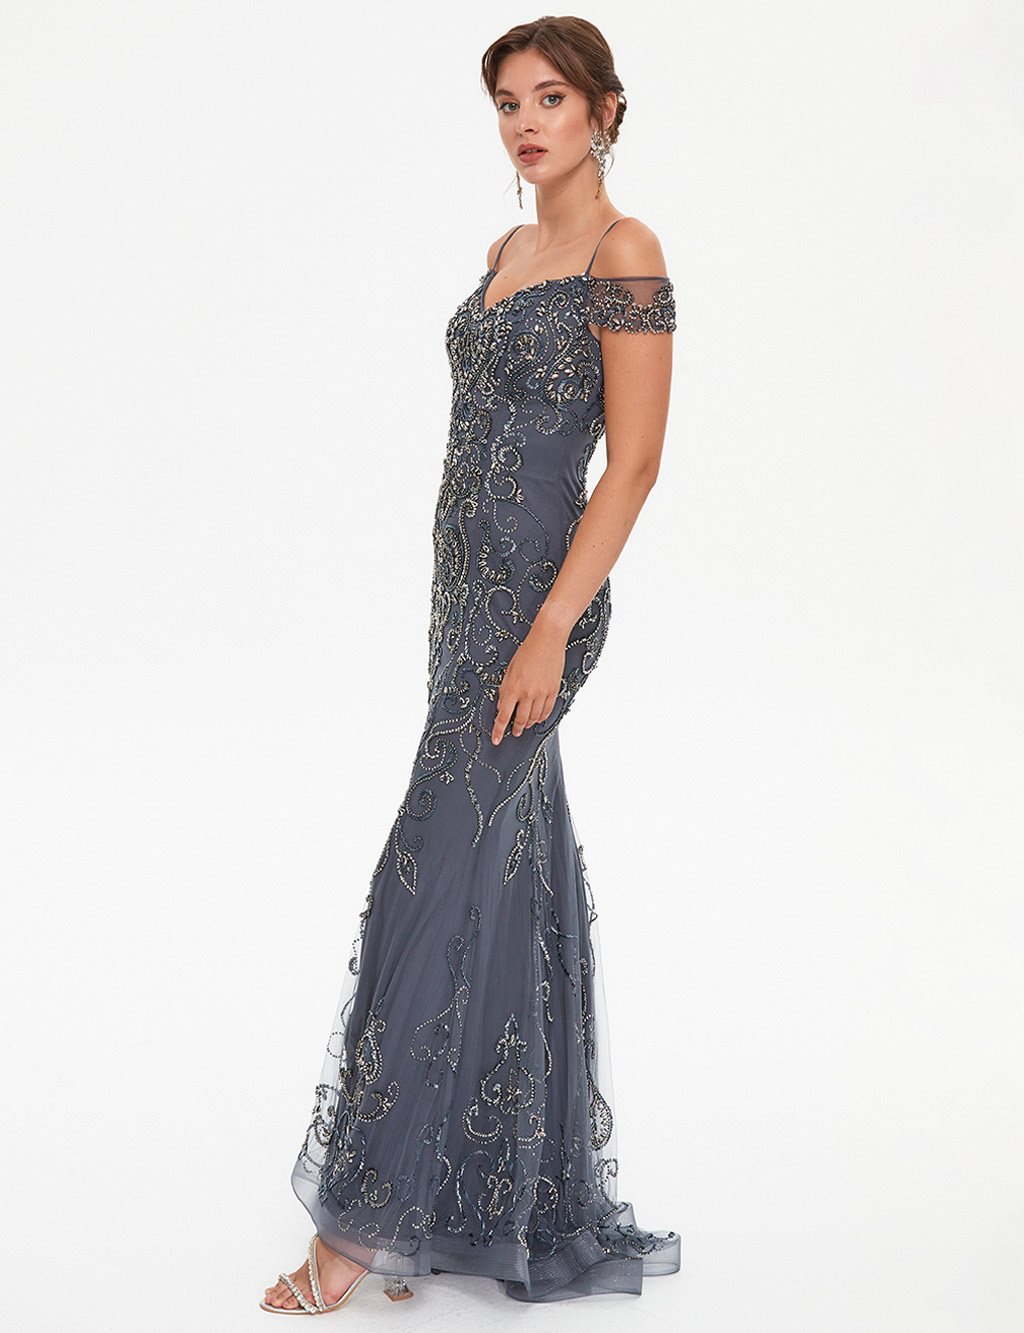 TIARA Thin Strap Stone Embroidered Evening Dress Anthracite